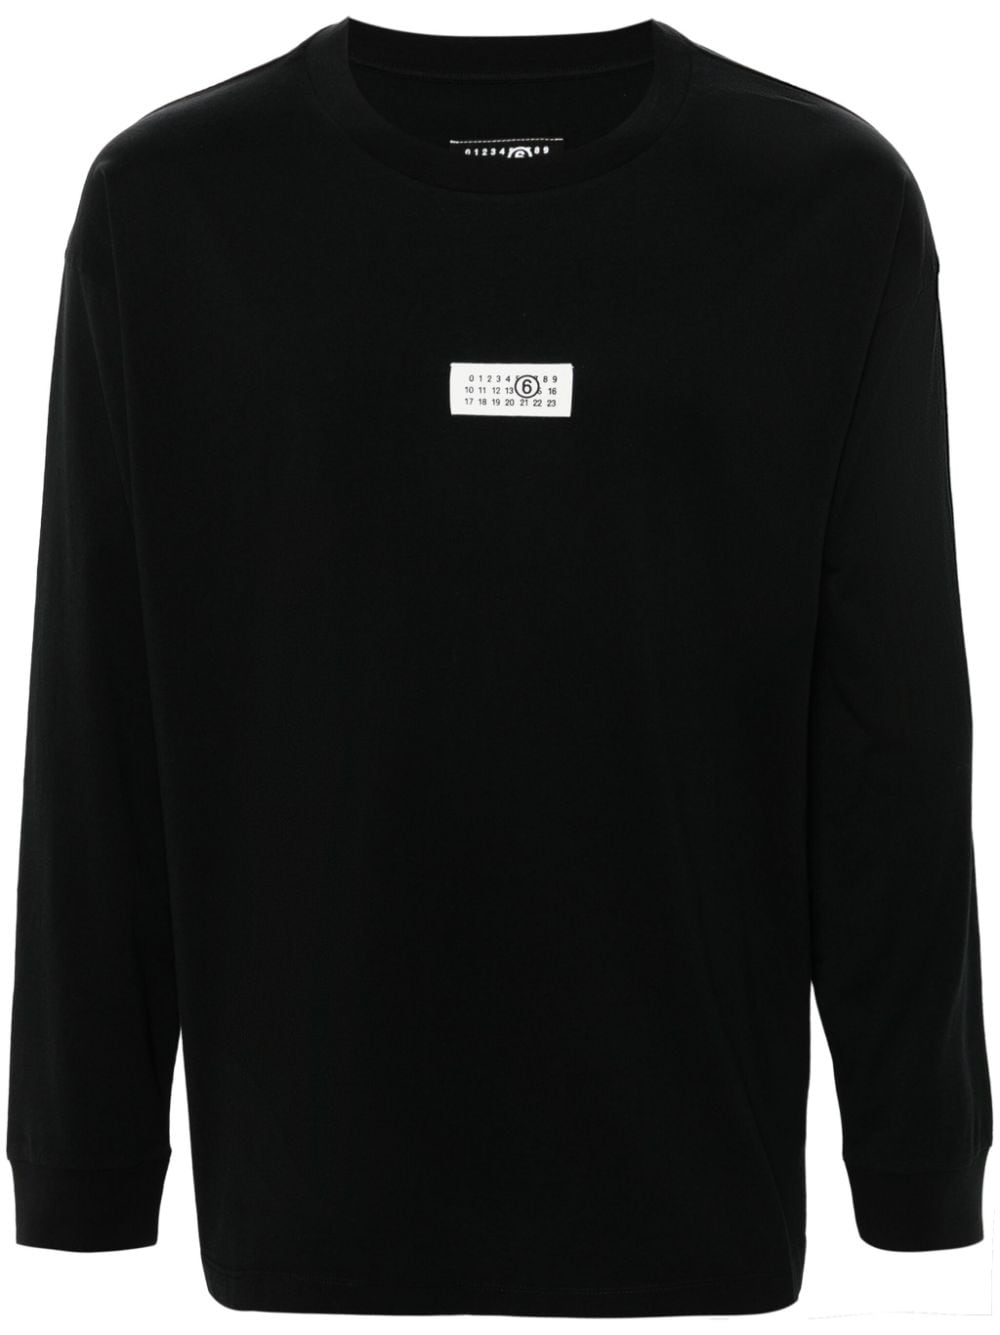 numbers-tag long-sleeve T-shirt